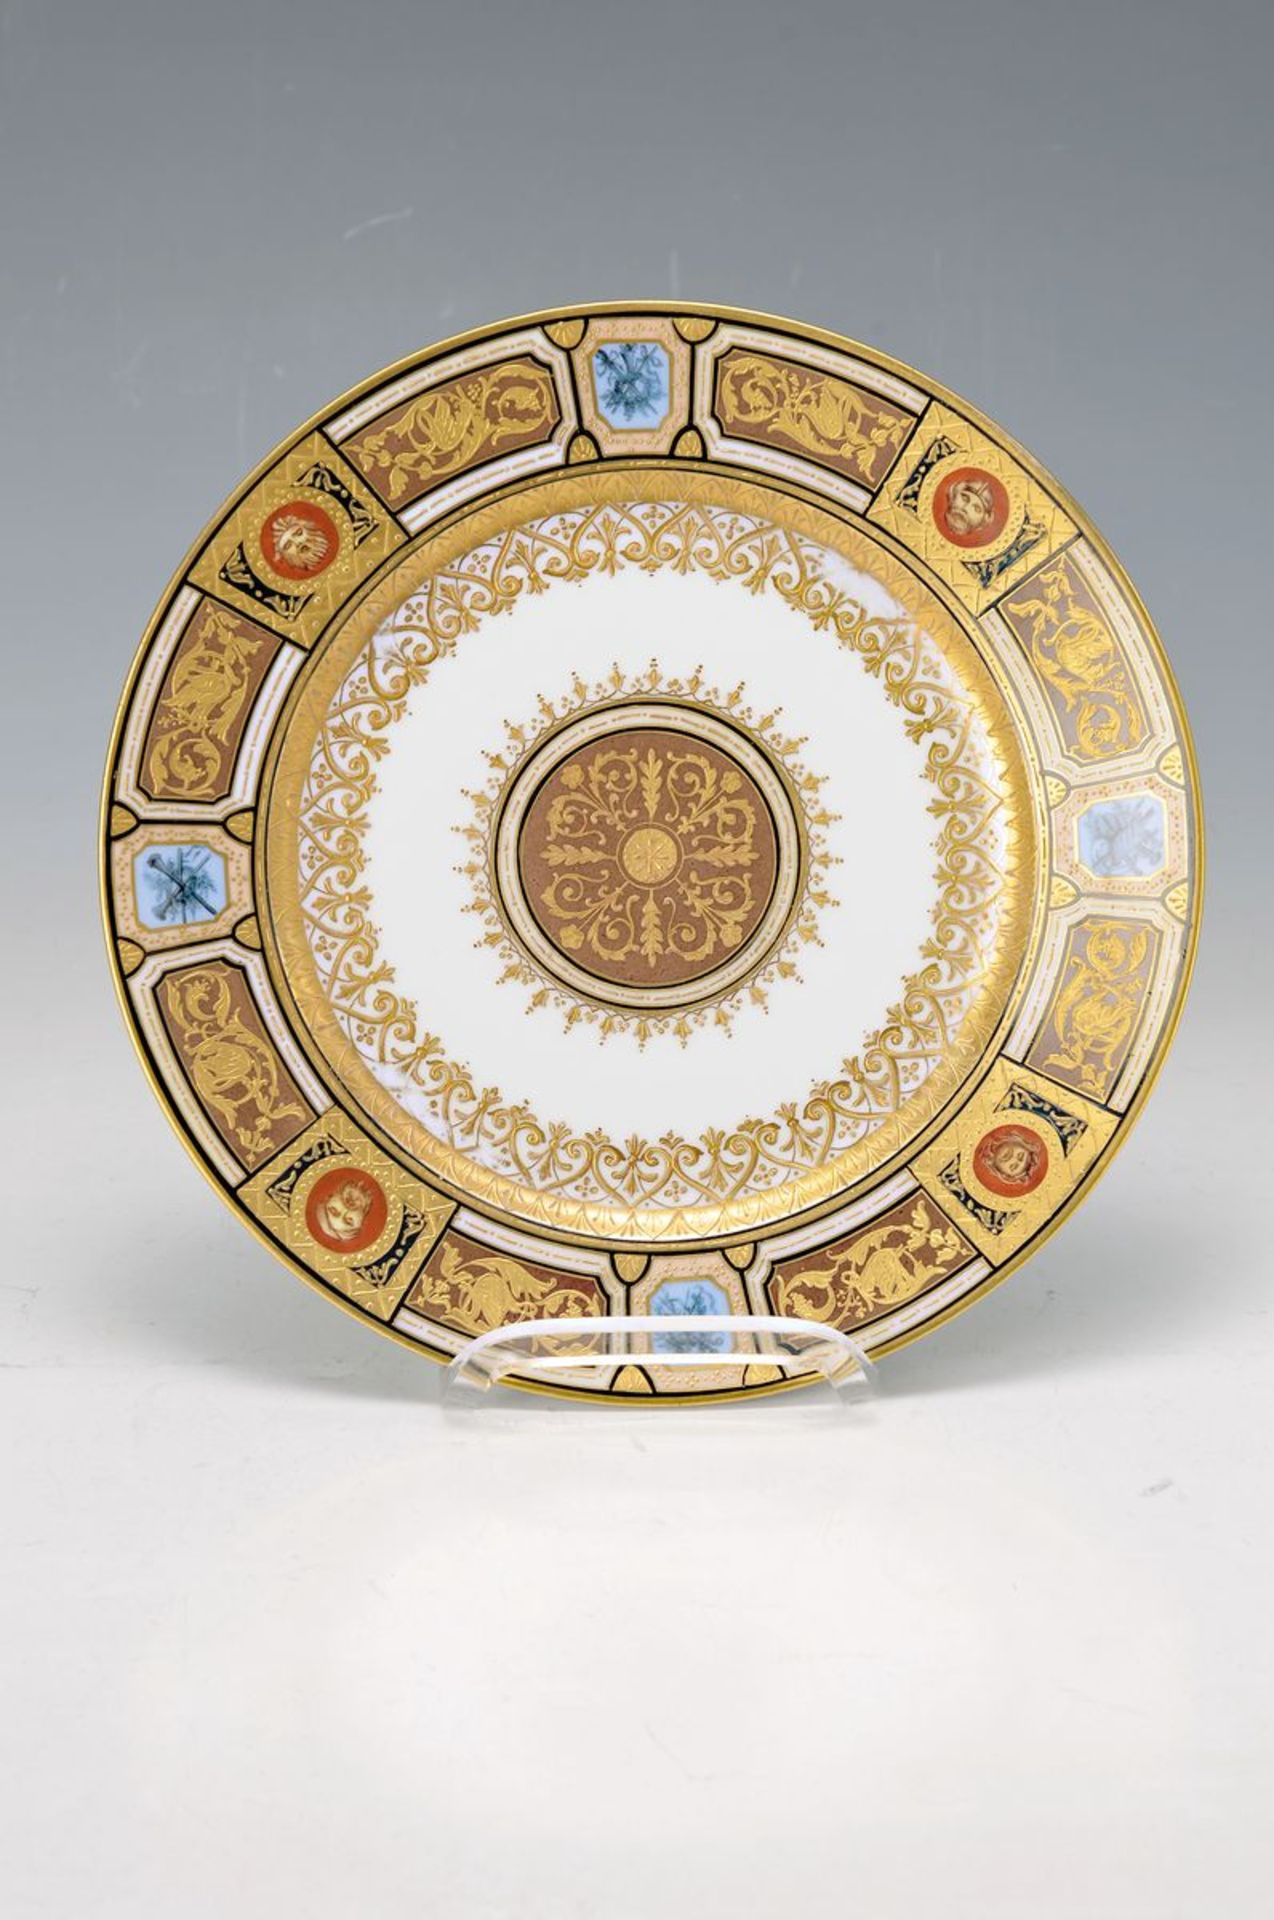 pompous plate, after Vienna model, around 1900, opulent painted with circumferential decor in